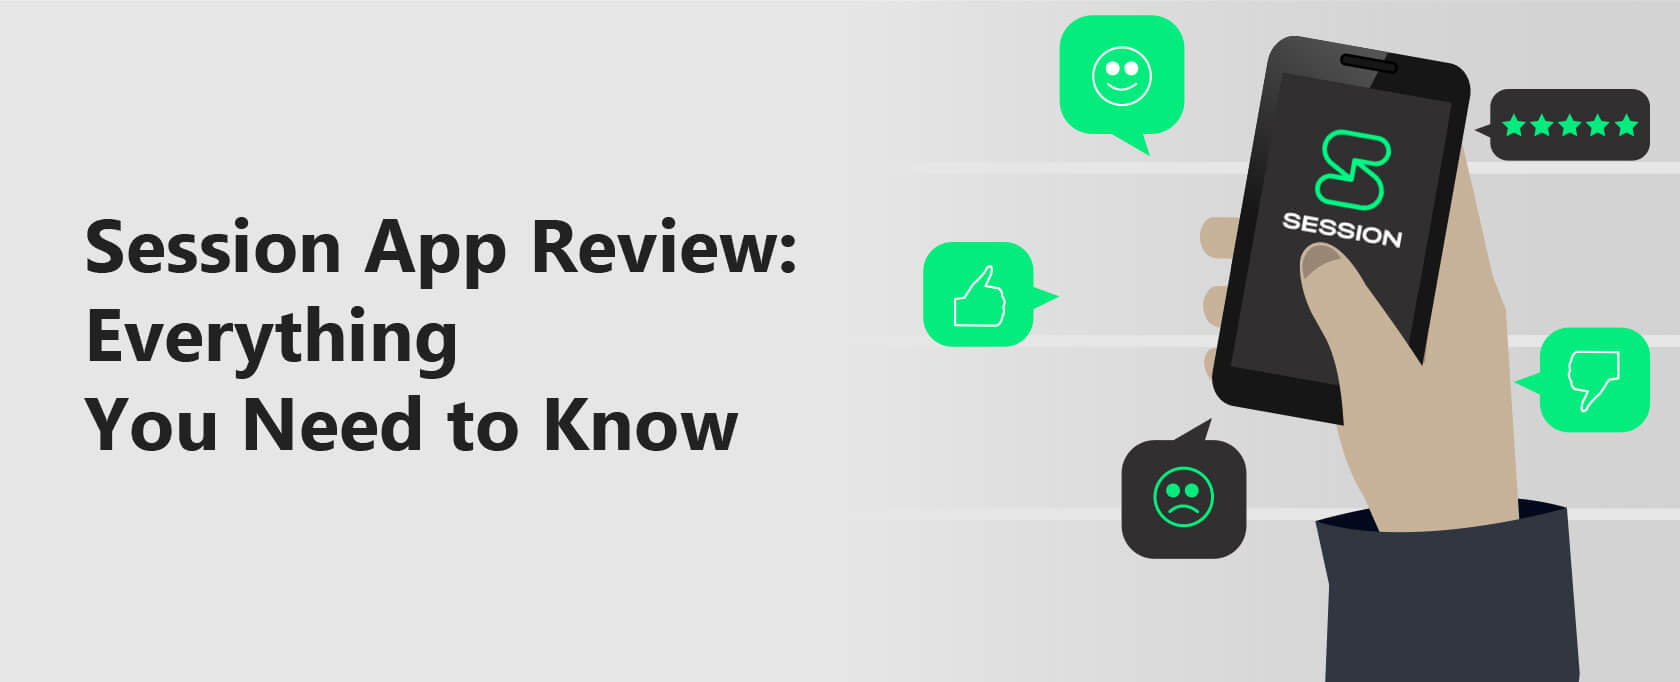 Session App Review: Everything You Need to Know